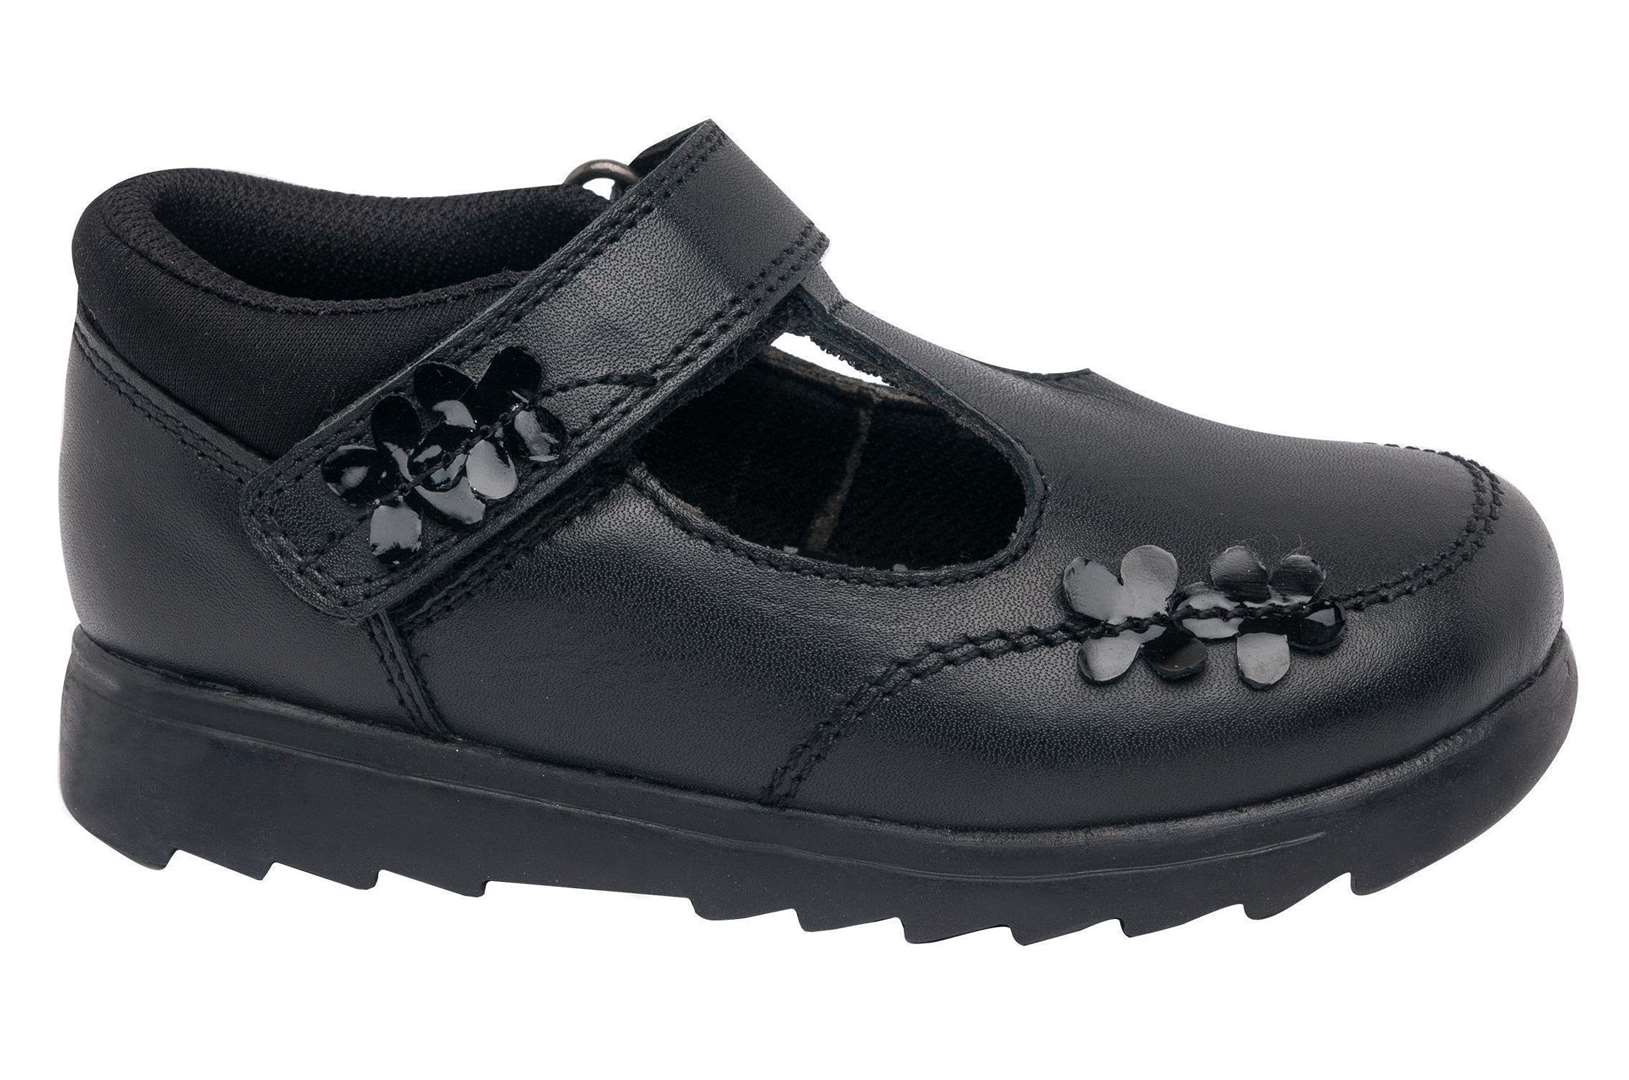 Cupcake Couture Girls' Leather T-bar School Shoes, £22.99 - available on buy one get one half price offer, Deichmann